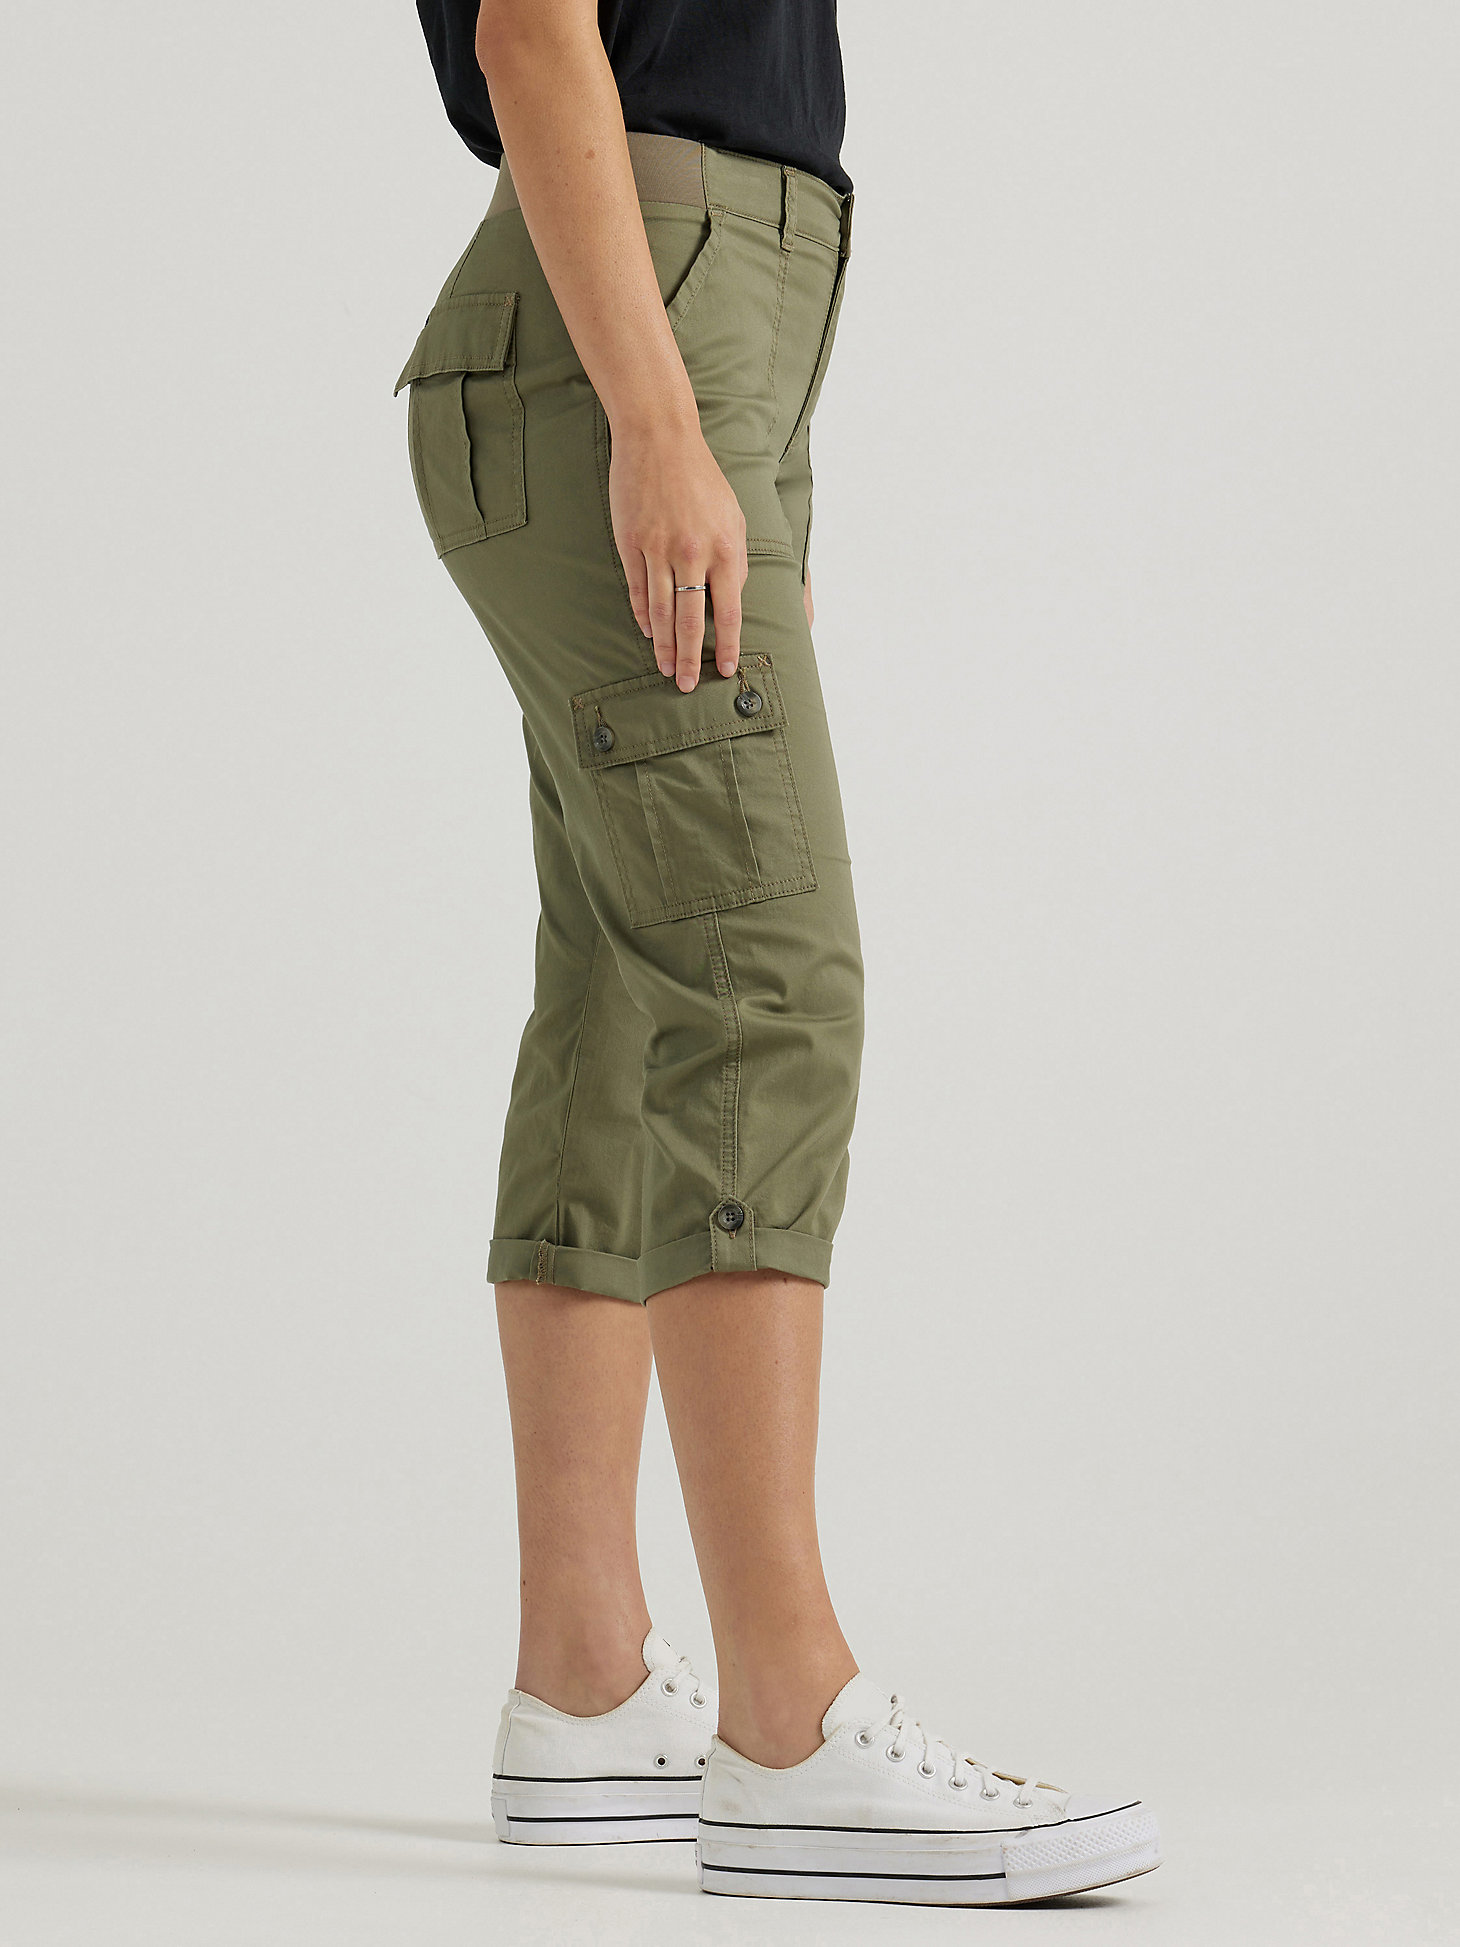 Women's Ultra Lux Comfort with Flex-to-Go Relaxed Fit Cargo Capri in Deep Lichen Green alternative view 4